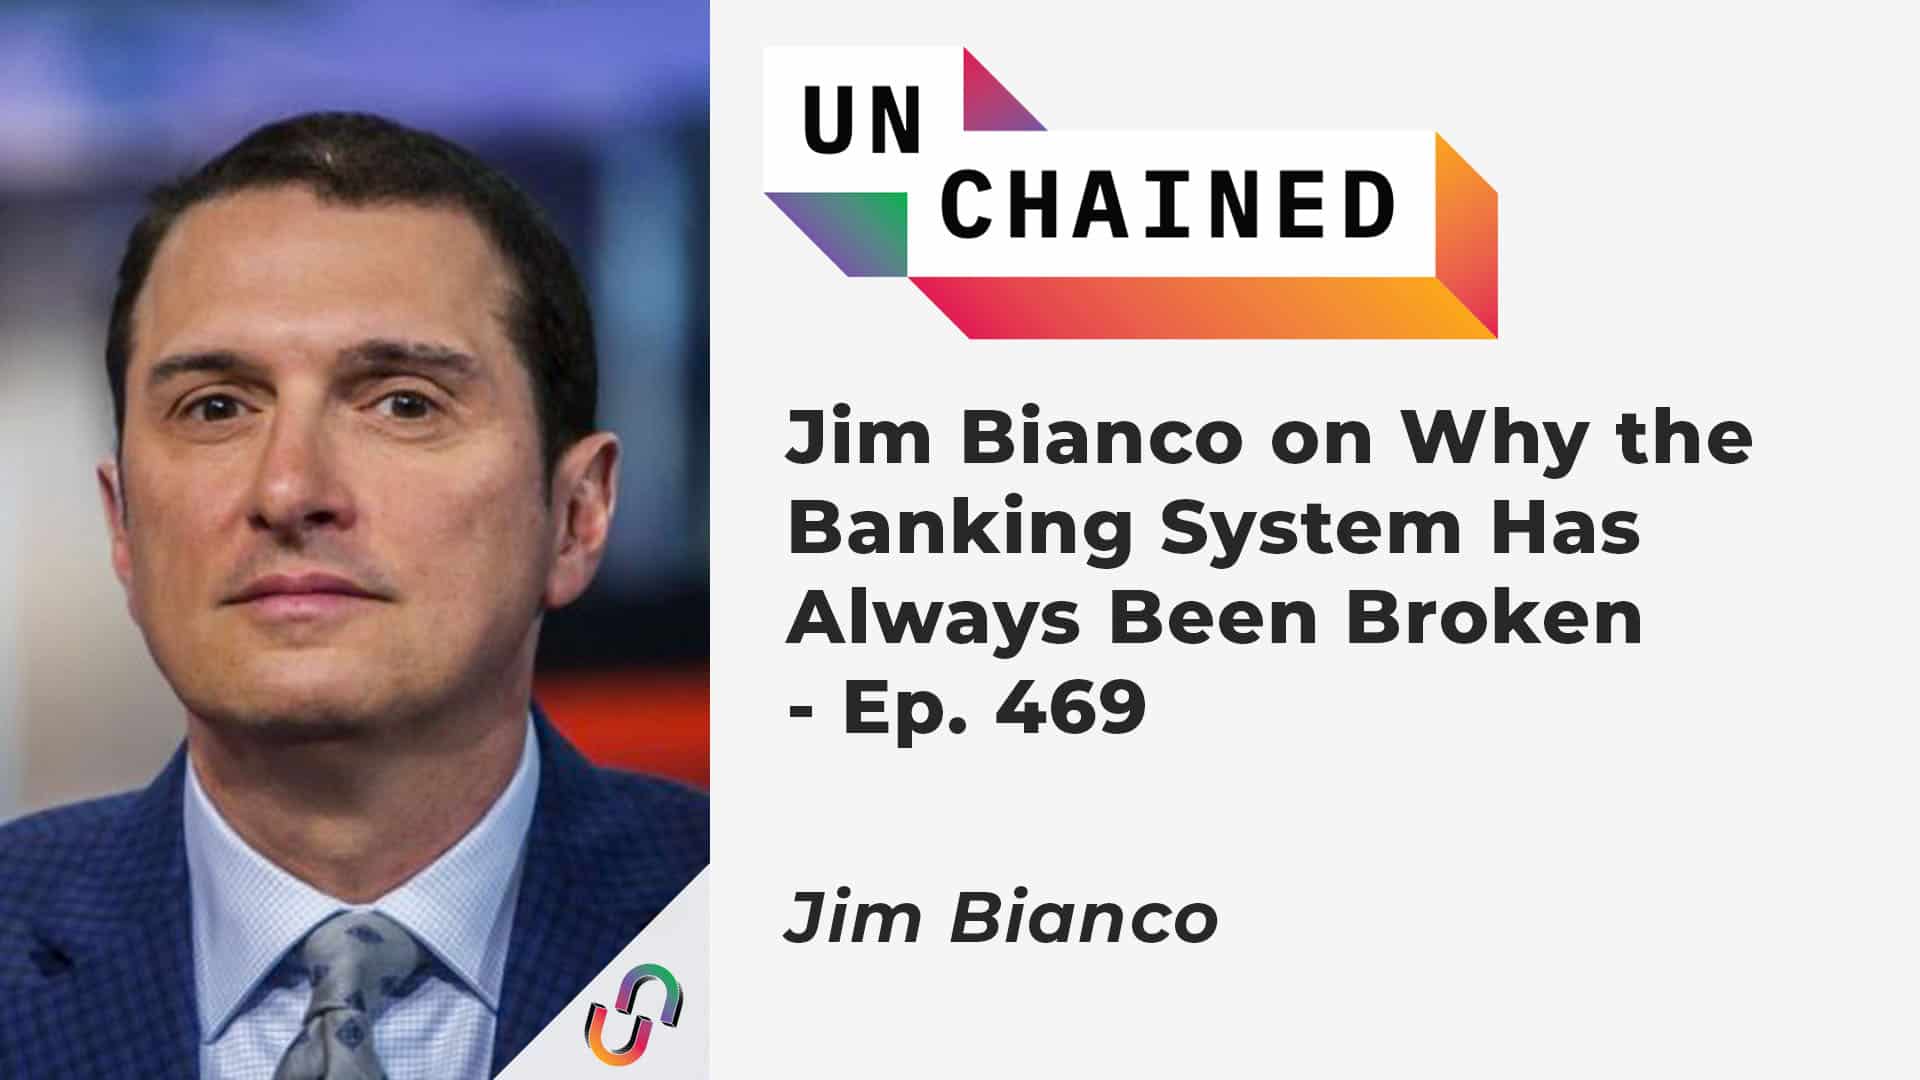 Jim Bianco on Why the Banking System Has Always Been Broken - Ep. 469